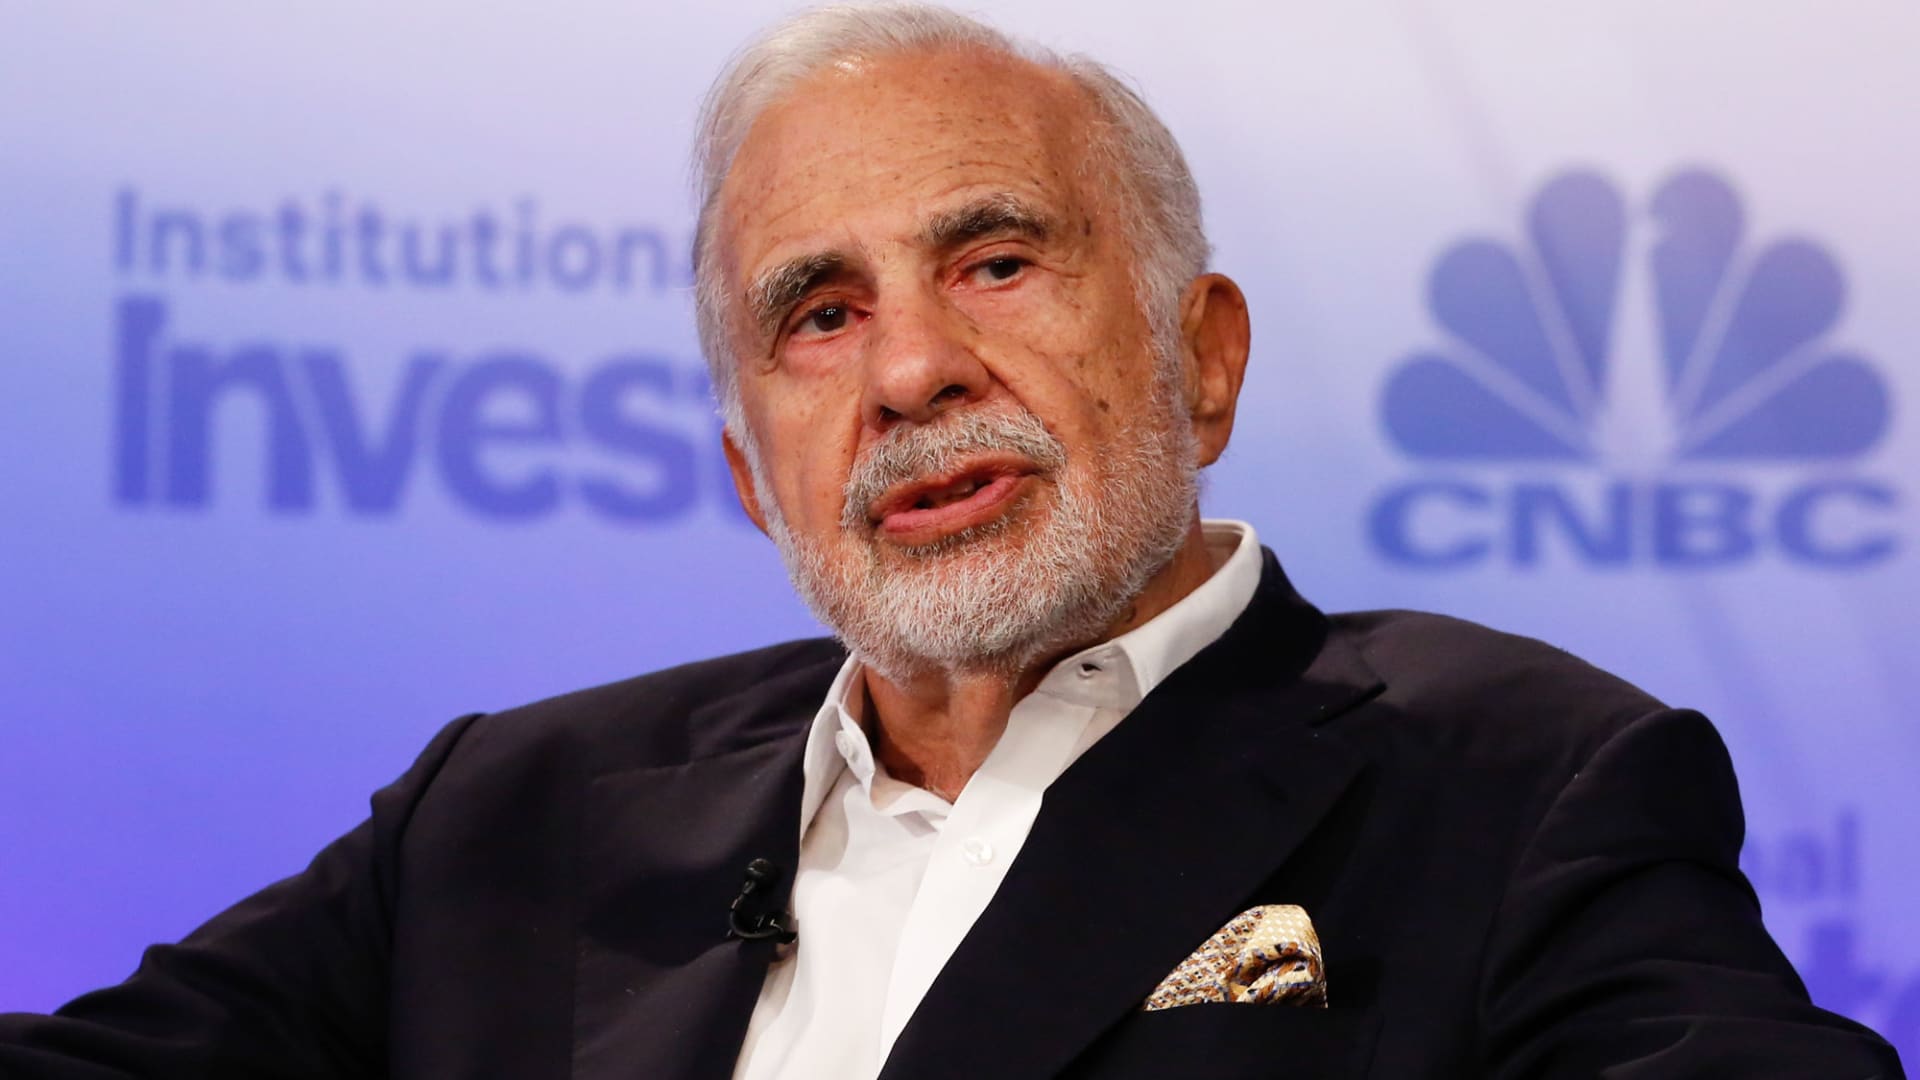 Carl Icahn says there ‘very well could be a recession or even worse’